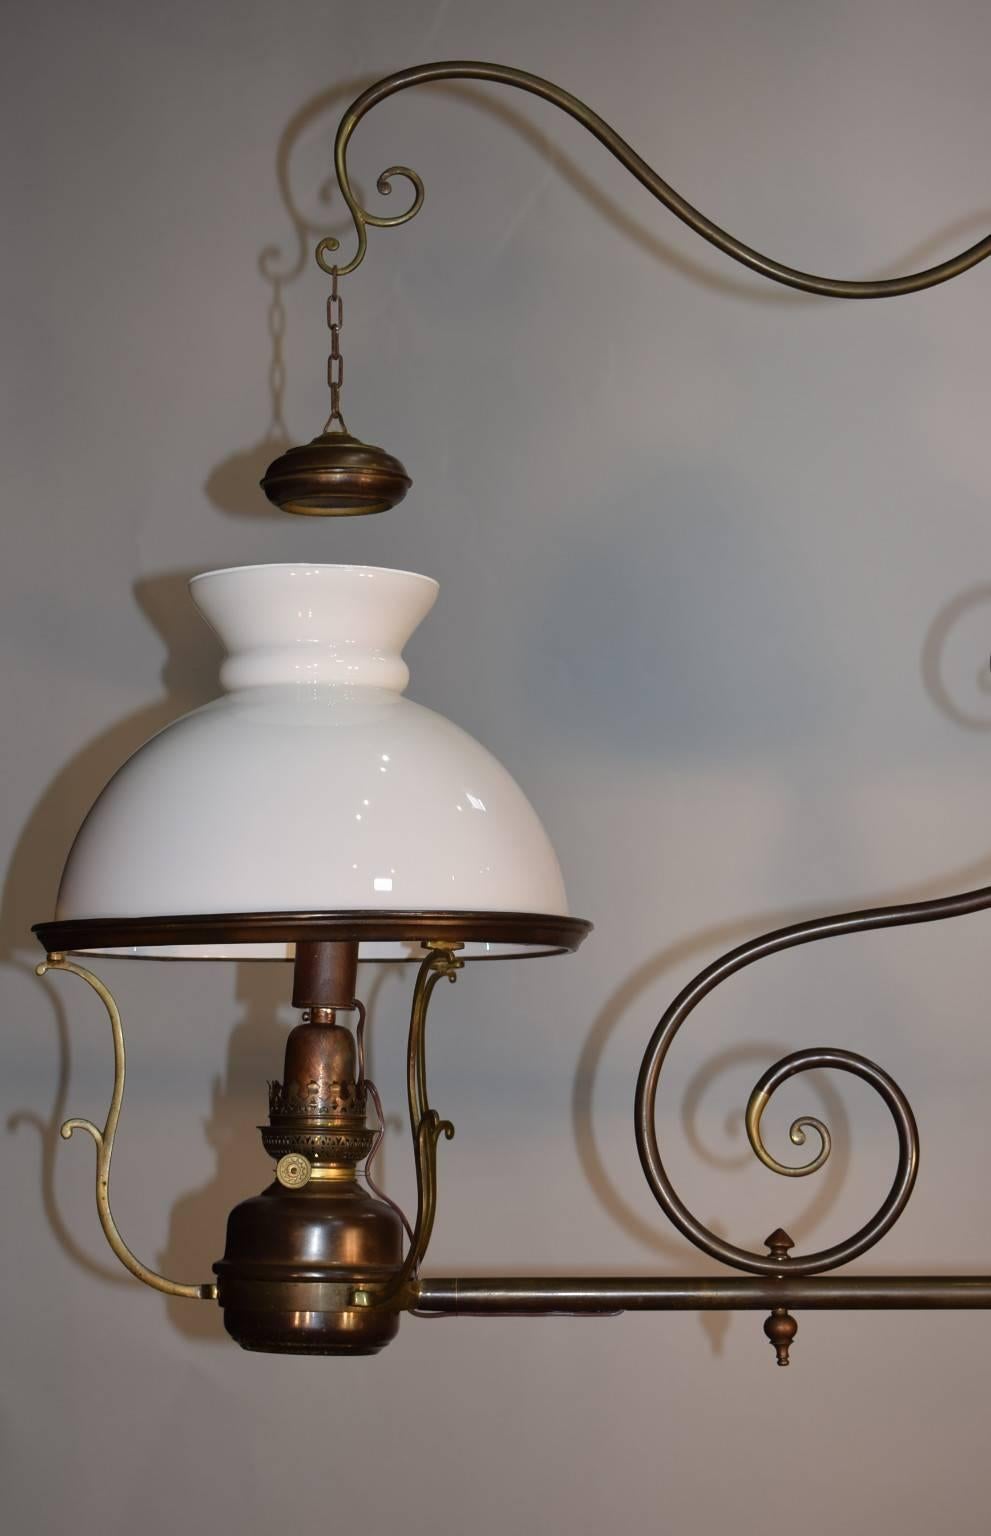 Fine two-light oil lamp with glass shades now converted to electric.